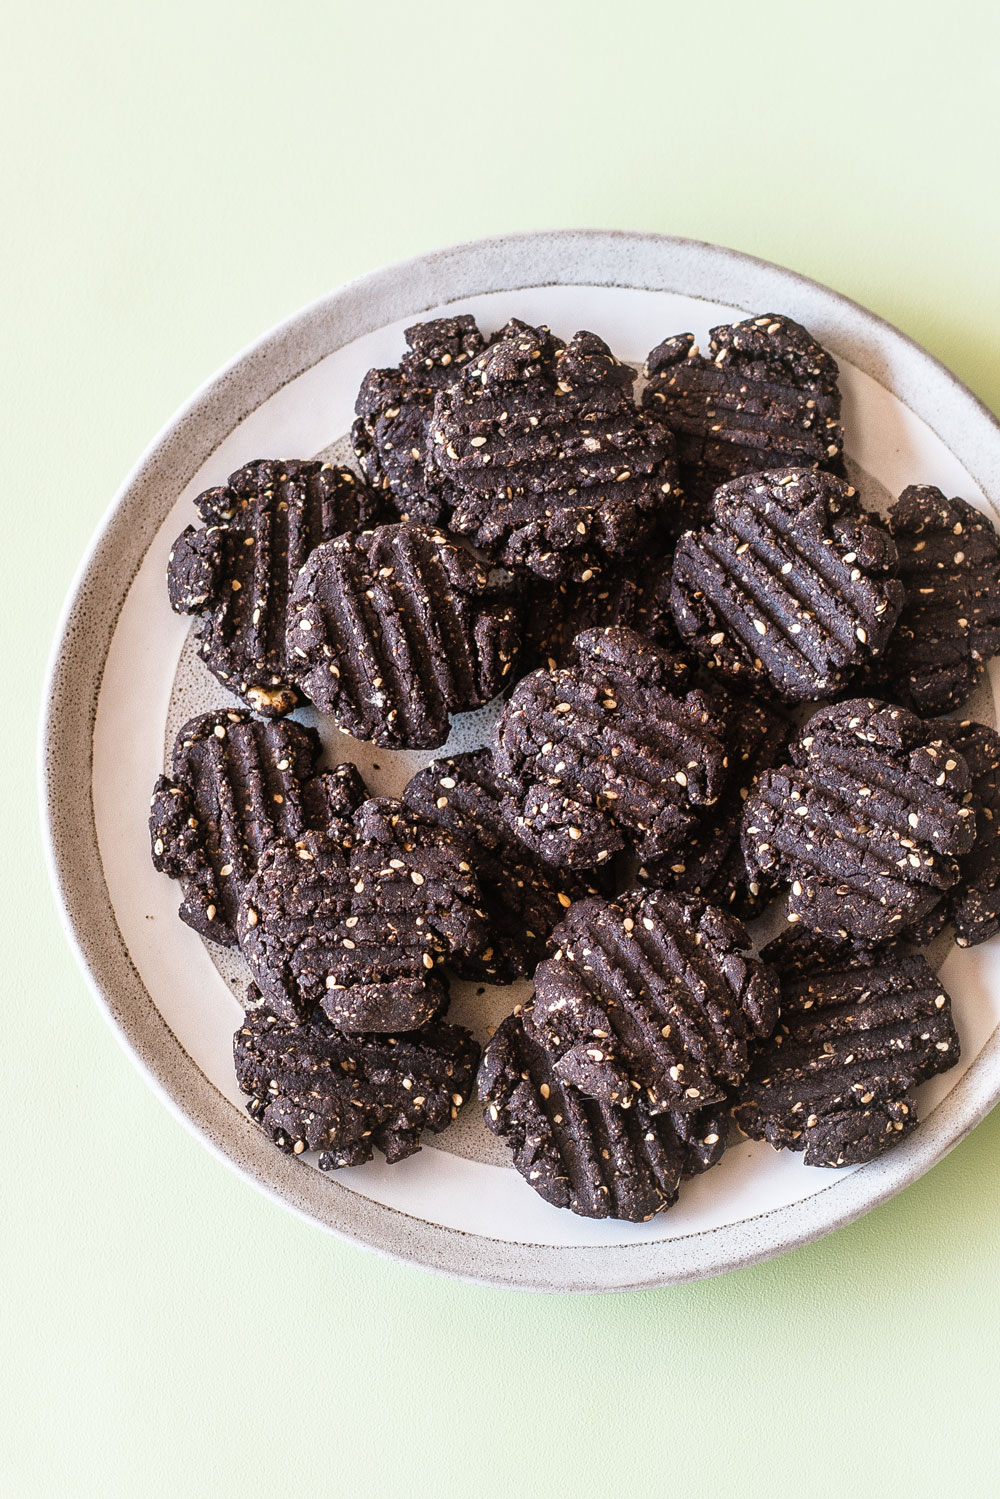 These crunchy carob cookies are gluten-free, sugar-free, and full of good-for-you ingredients like almonds, oats, sesame seeds, and ghee! https://www.spotebi.com/recipes/gluten-free-sugar-free-crunchy-carob-cookies/